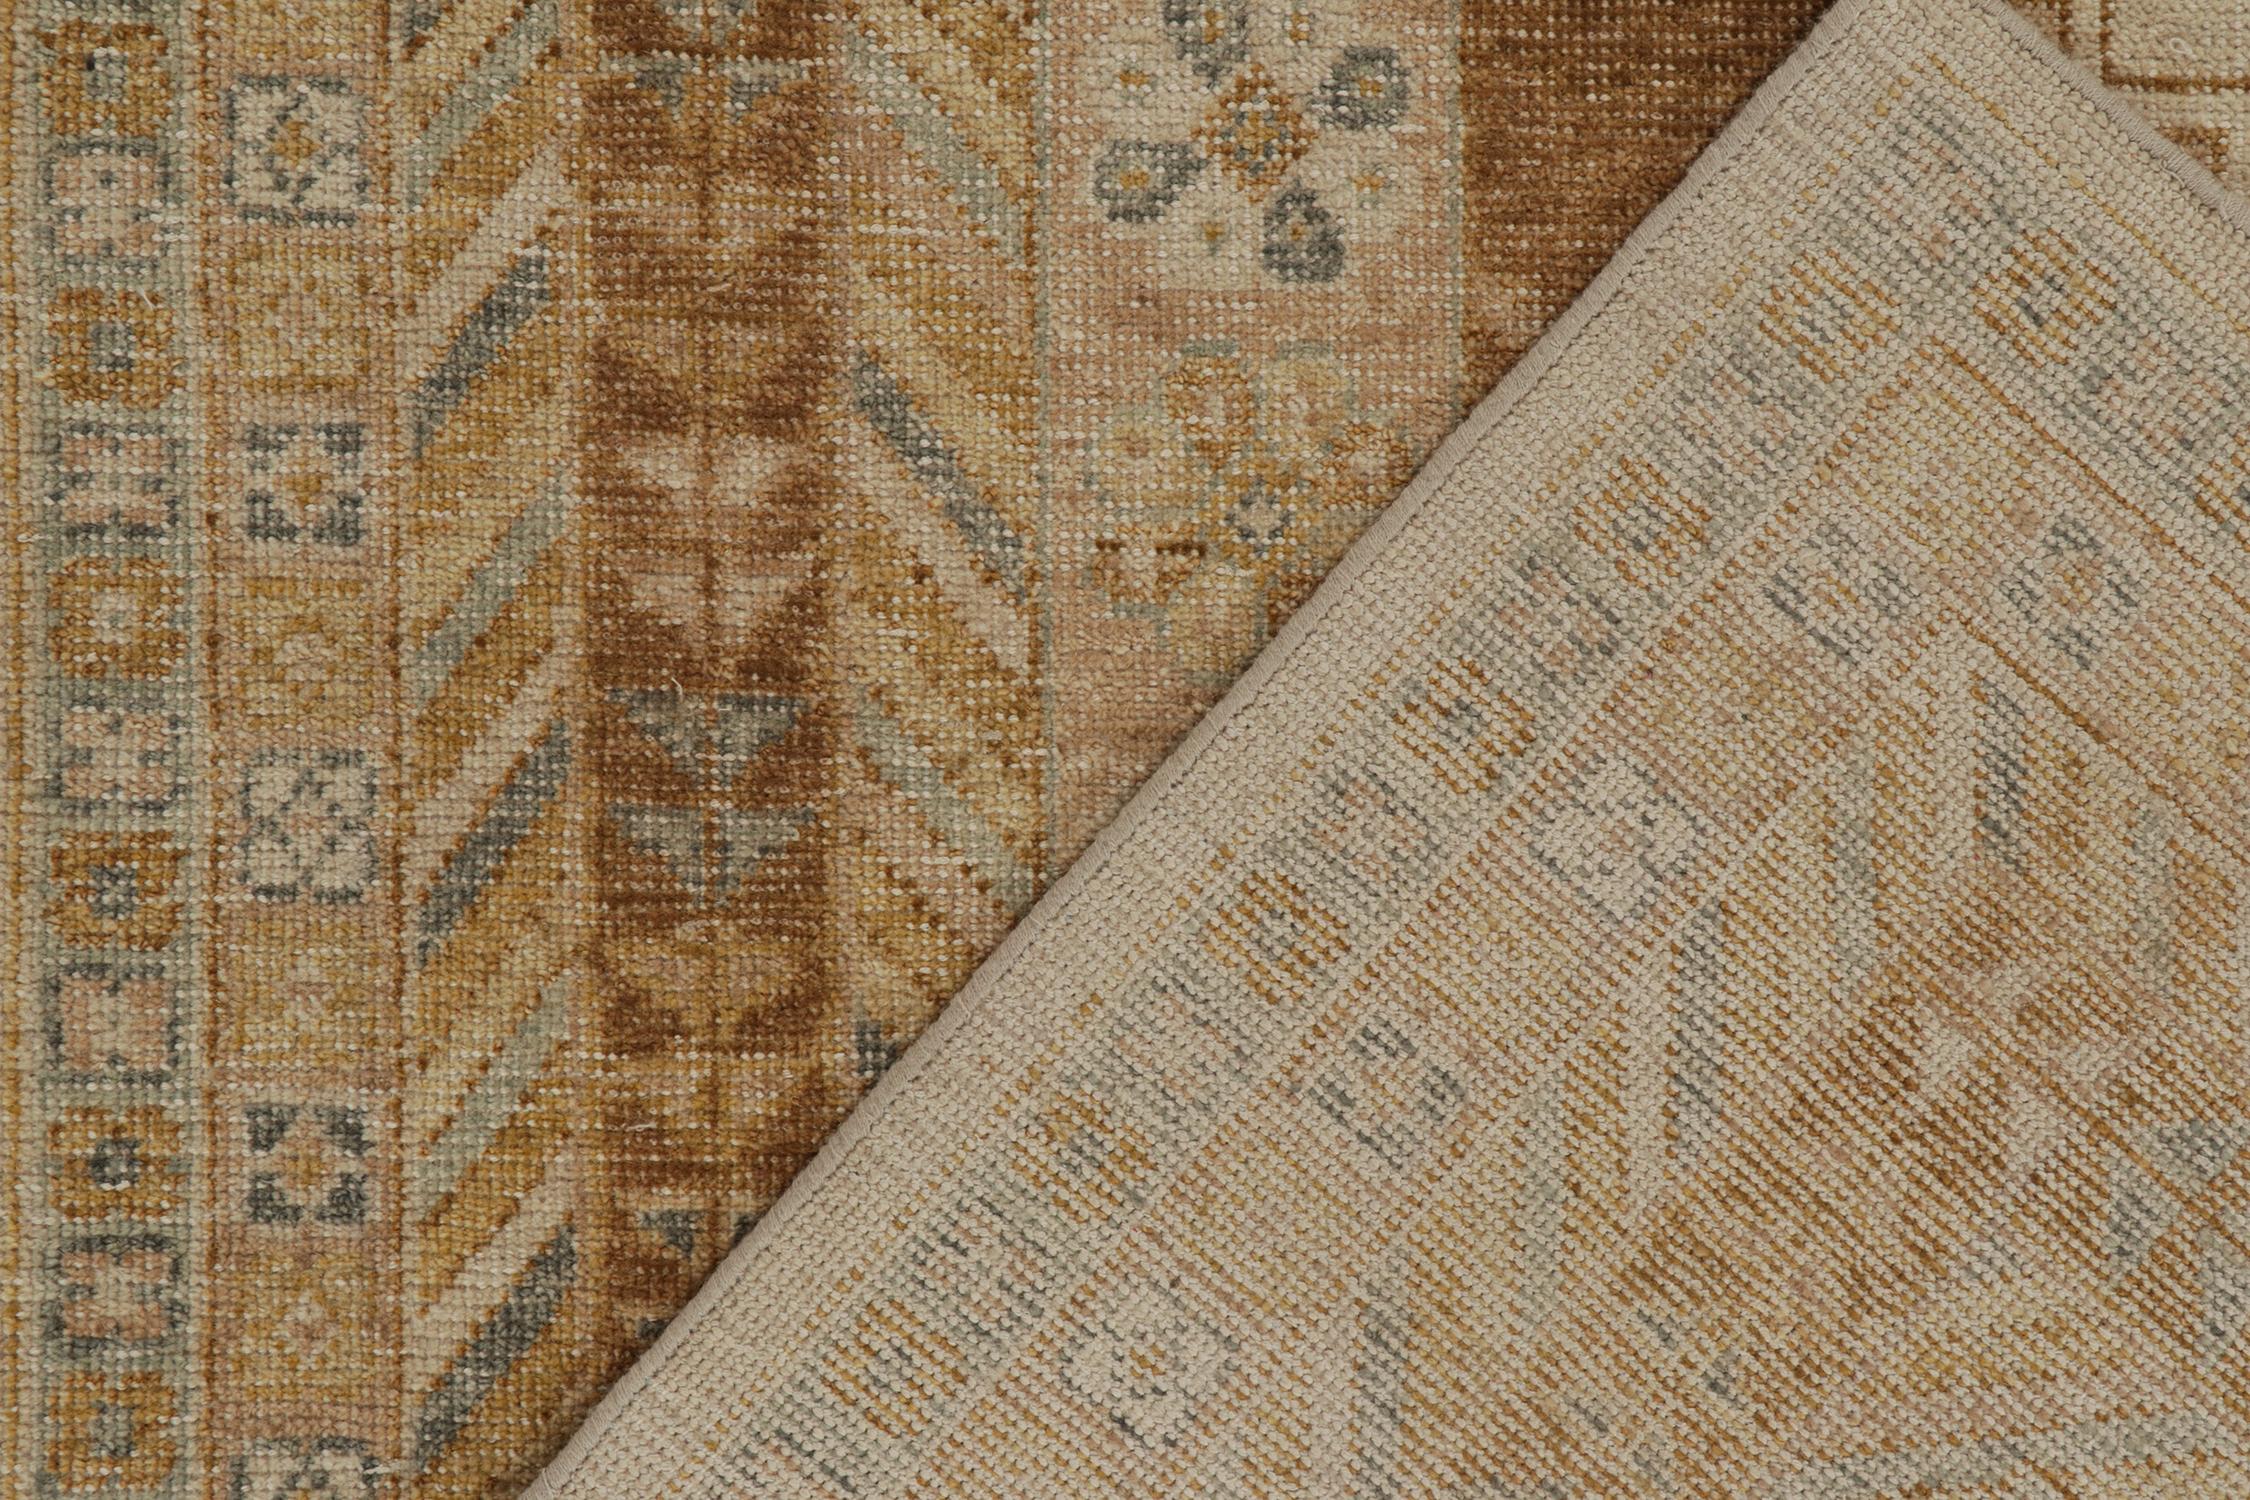 Wool Rug & Kilim’s Distressed Tribal Style Rug in Beige, Brown and Gold Patterns For Sale